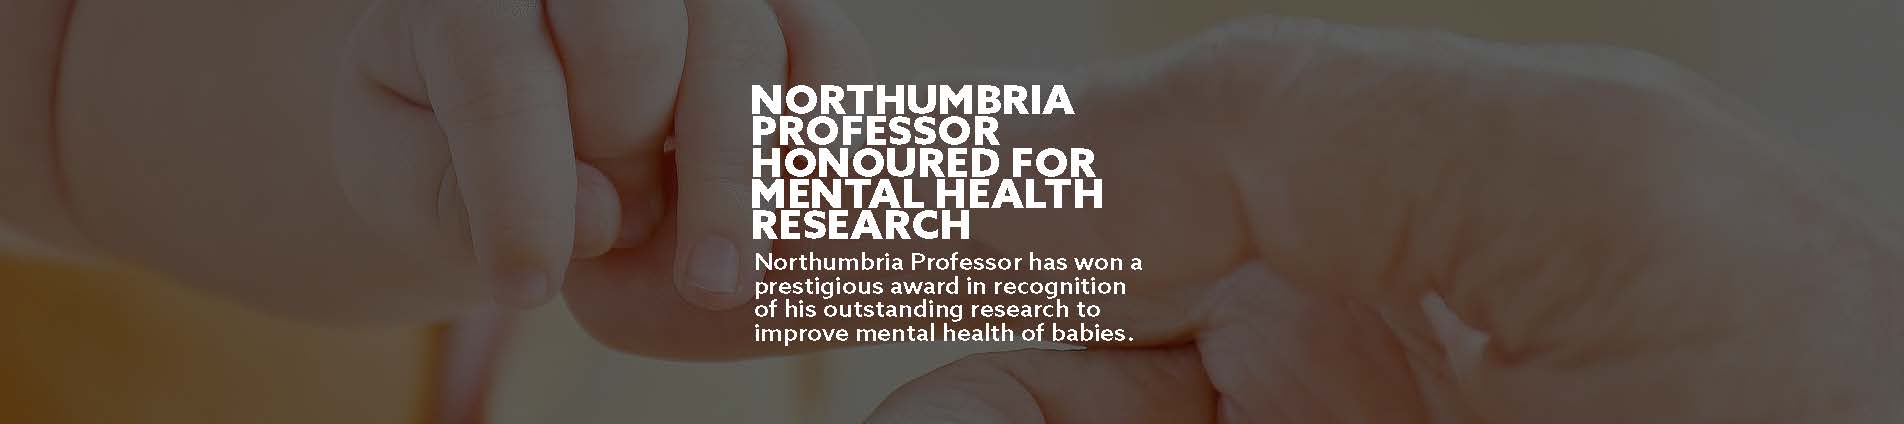 Northumbria professor honoured for mental health research